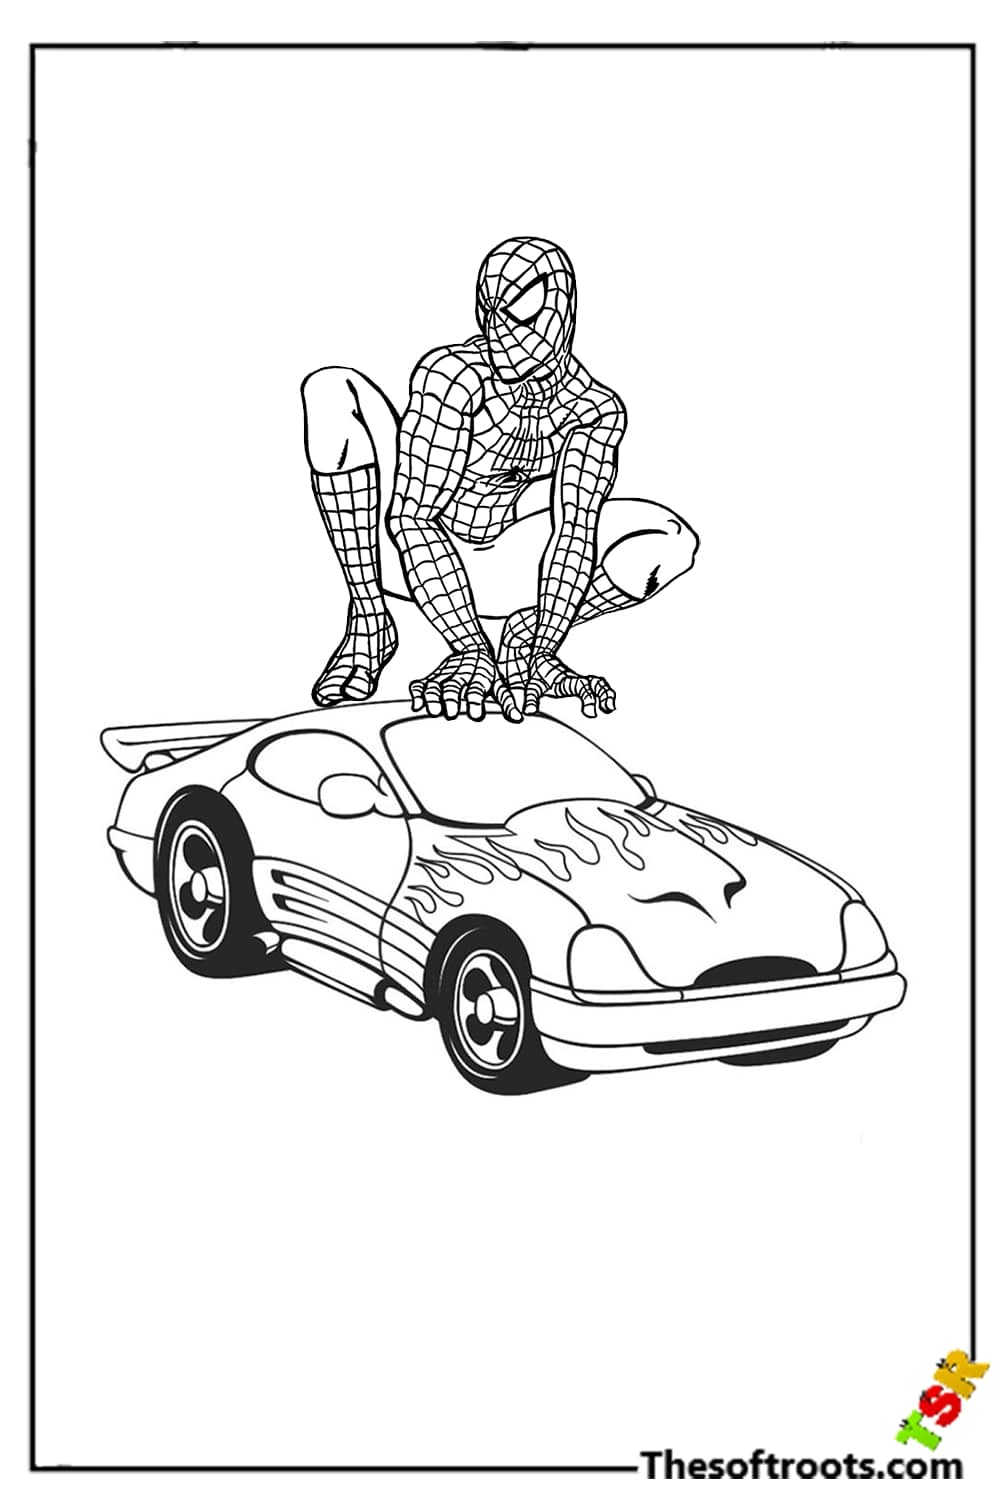 Spiderman on car coloring pages